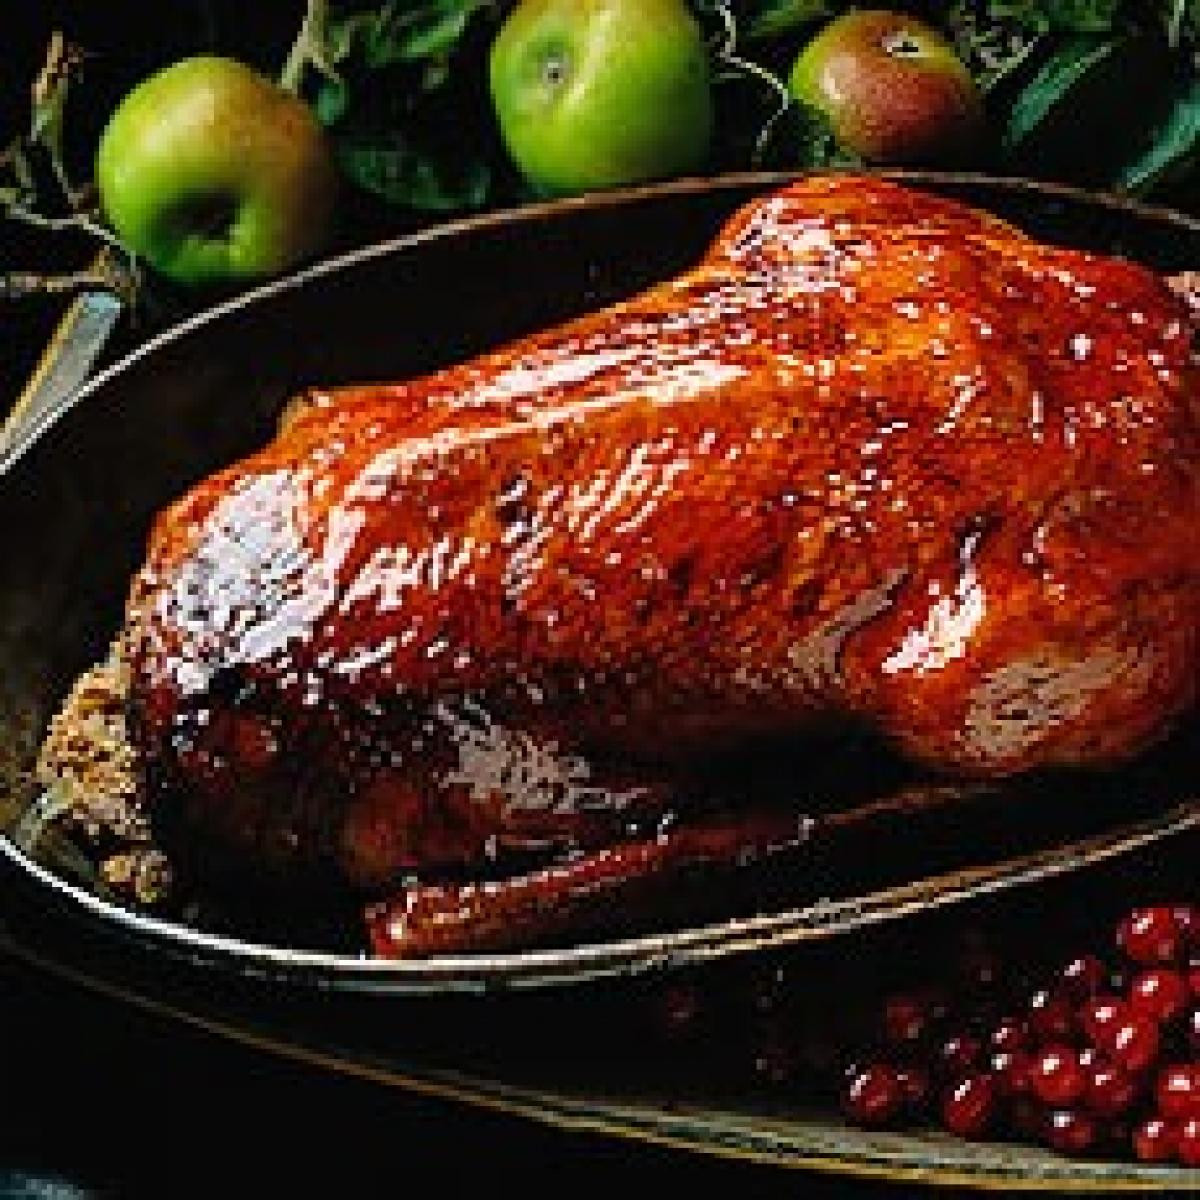 Christmas Goose Recipes
 Roast Goose with Pork Sage and Pear Stuffing with a